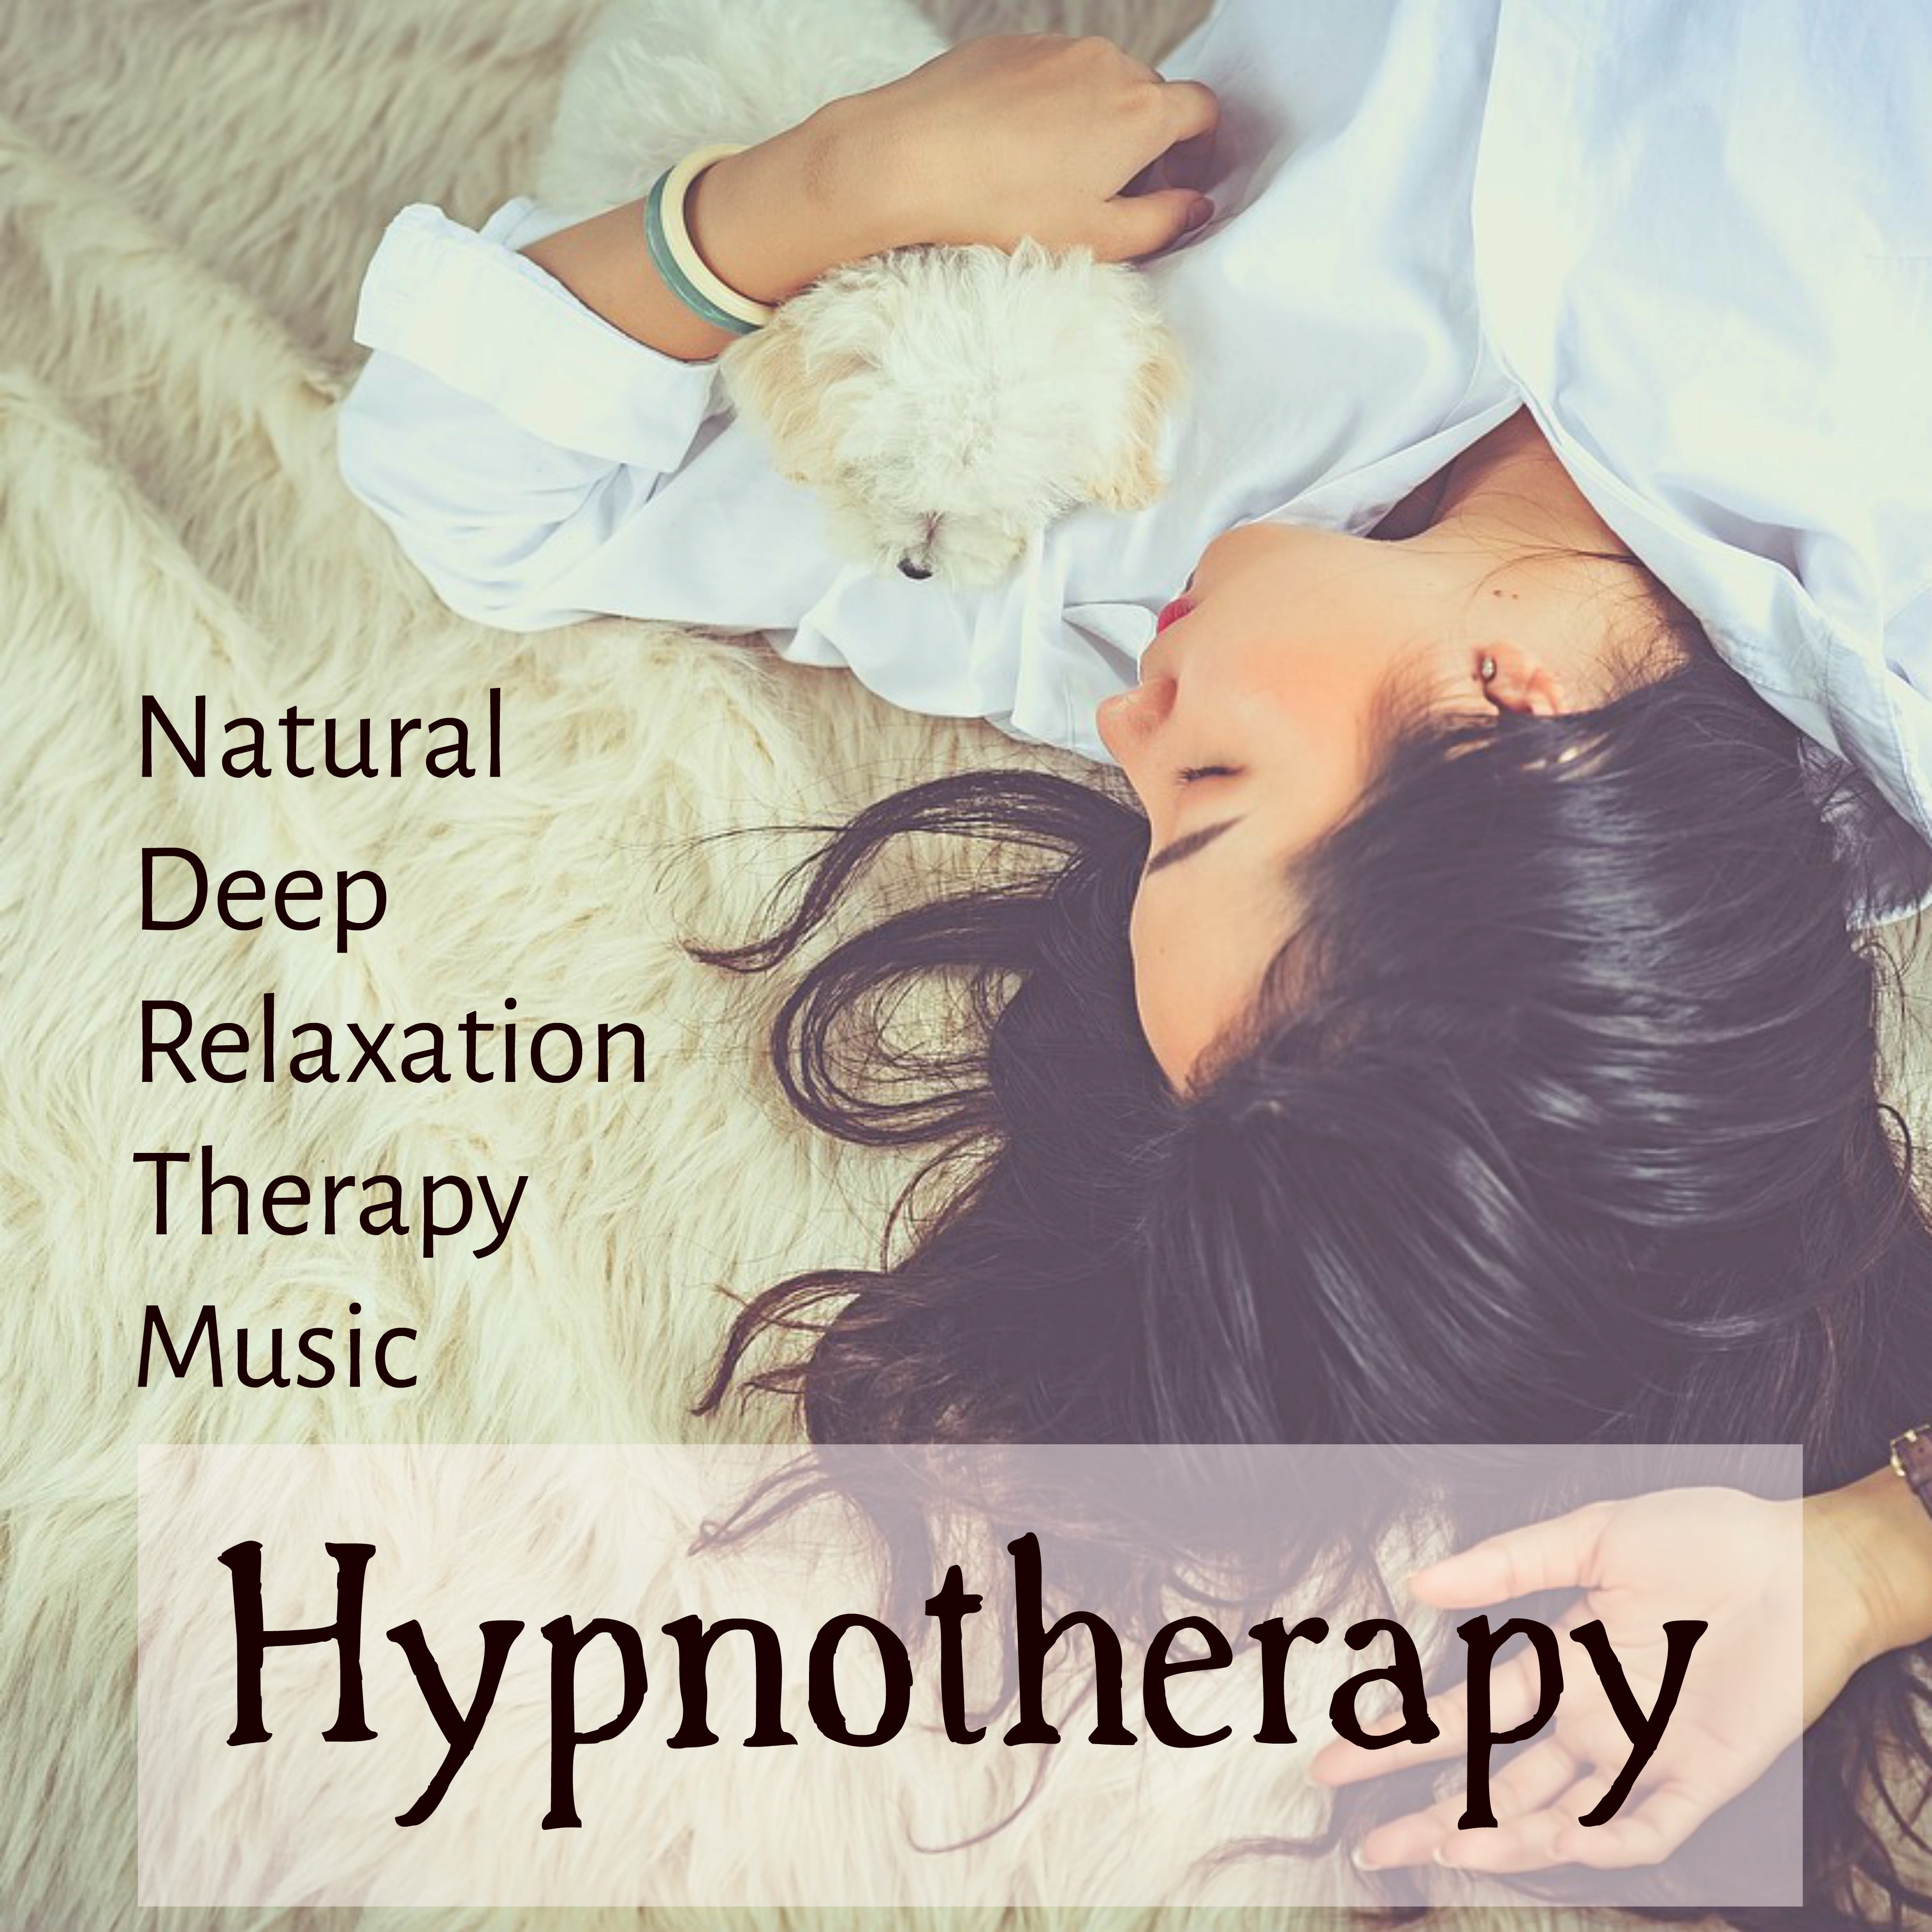 Hypnotherapy - Natural Deep Relaxation Therapy Music to Reduce Stress Anxiety Therapy with Soft Instrumental Background